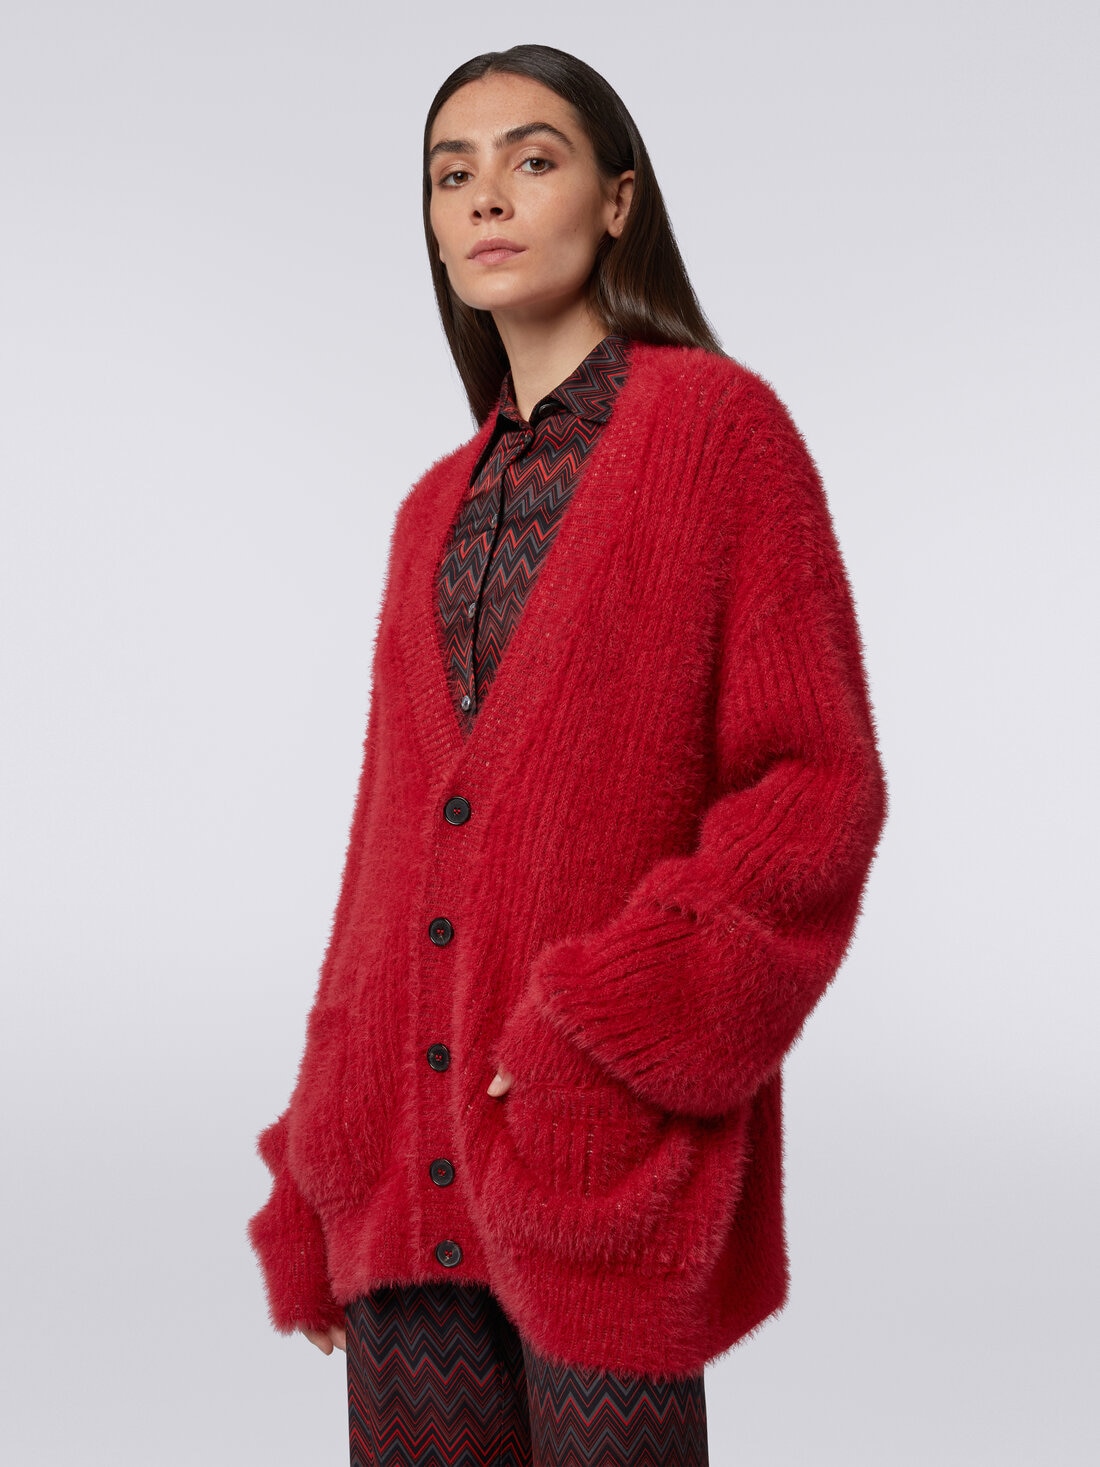 Oversized cardigan in fur-effect wool blend, Red  - DS24SM0WBK026I91559 - 4